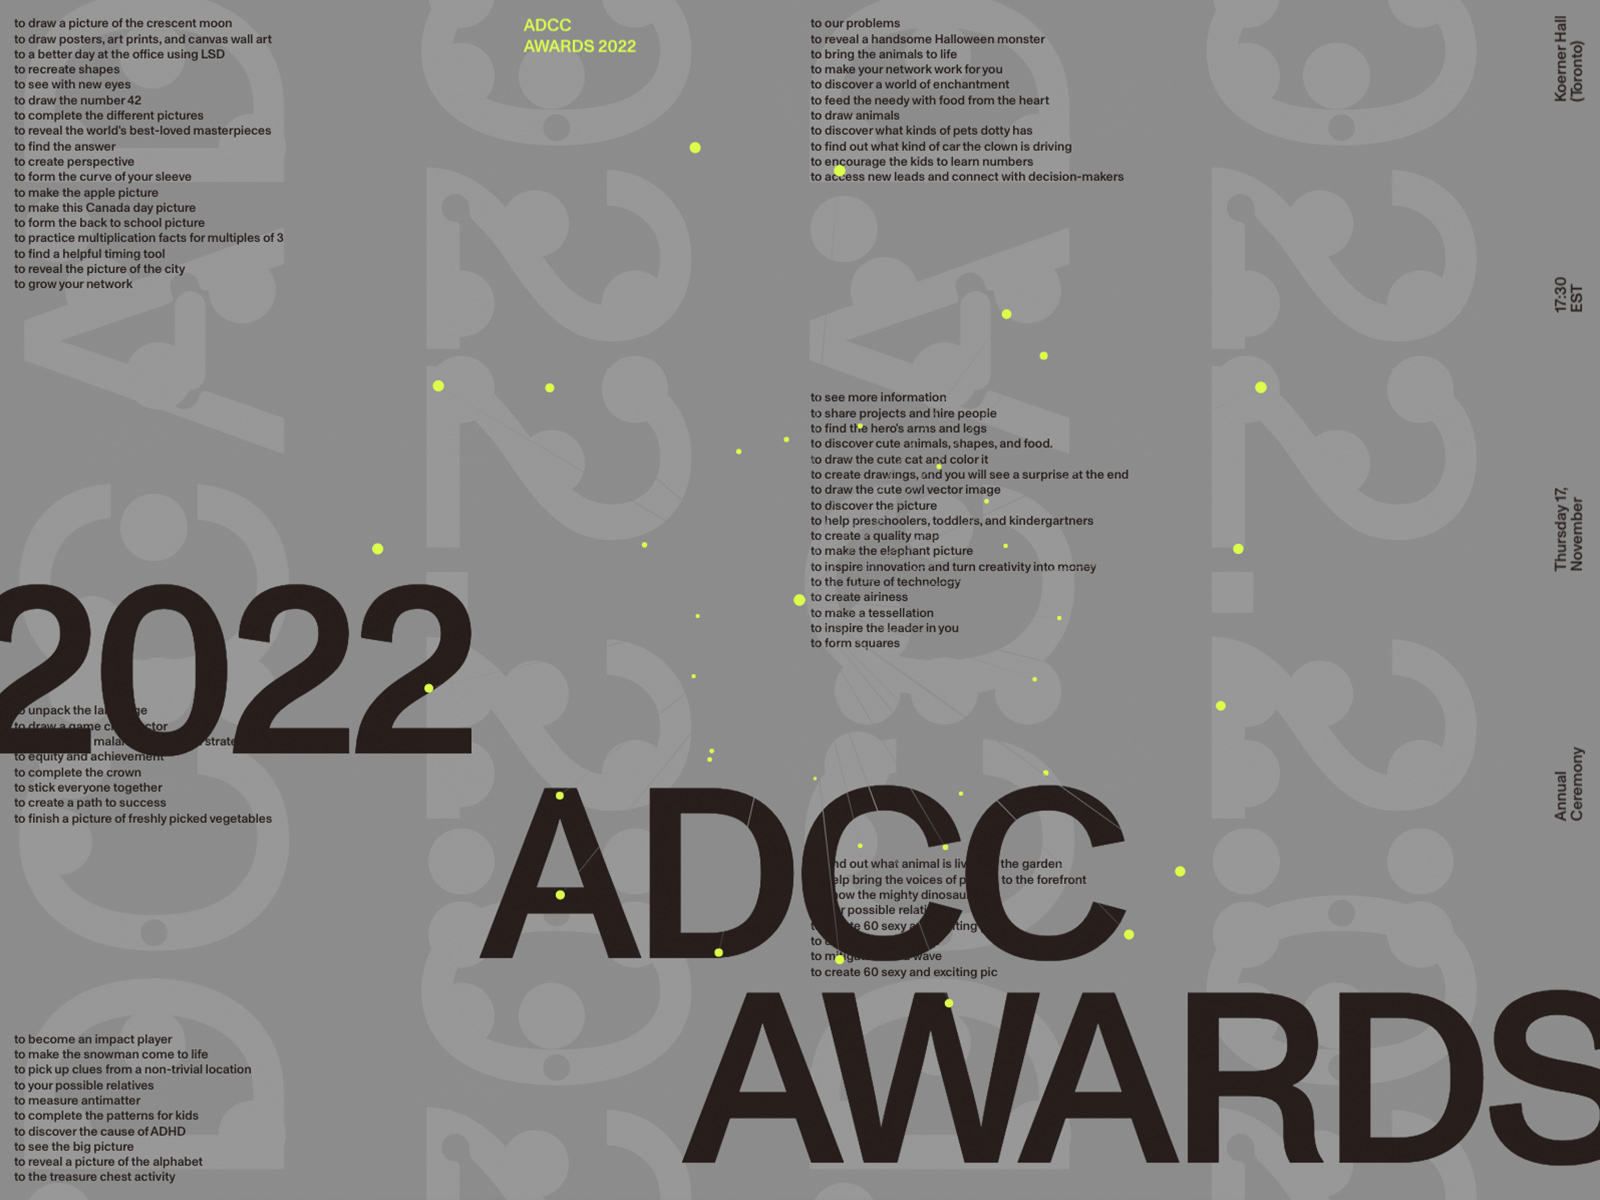 The 2022 ADCC Awards